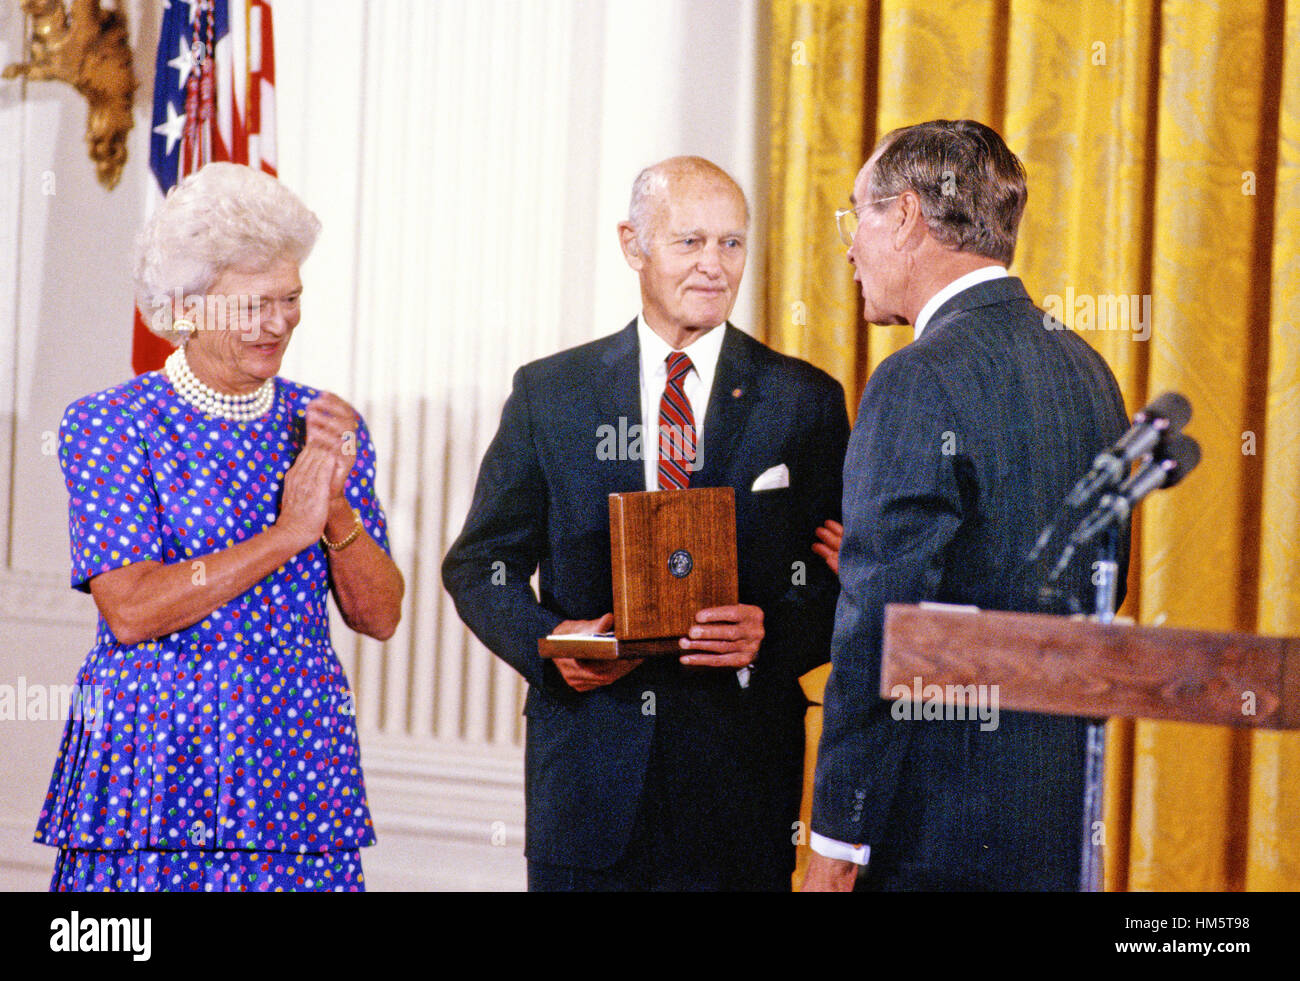 George F. Kennan, Diplomat, Political Scientist, and Historian, center, is awarded the Presidential Medal of Freedom, the highest civilian award of the United States, by US President George H.W. Bush, right, and first lady Barbara Bush, left, in a ceremon Stock Photo